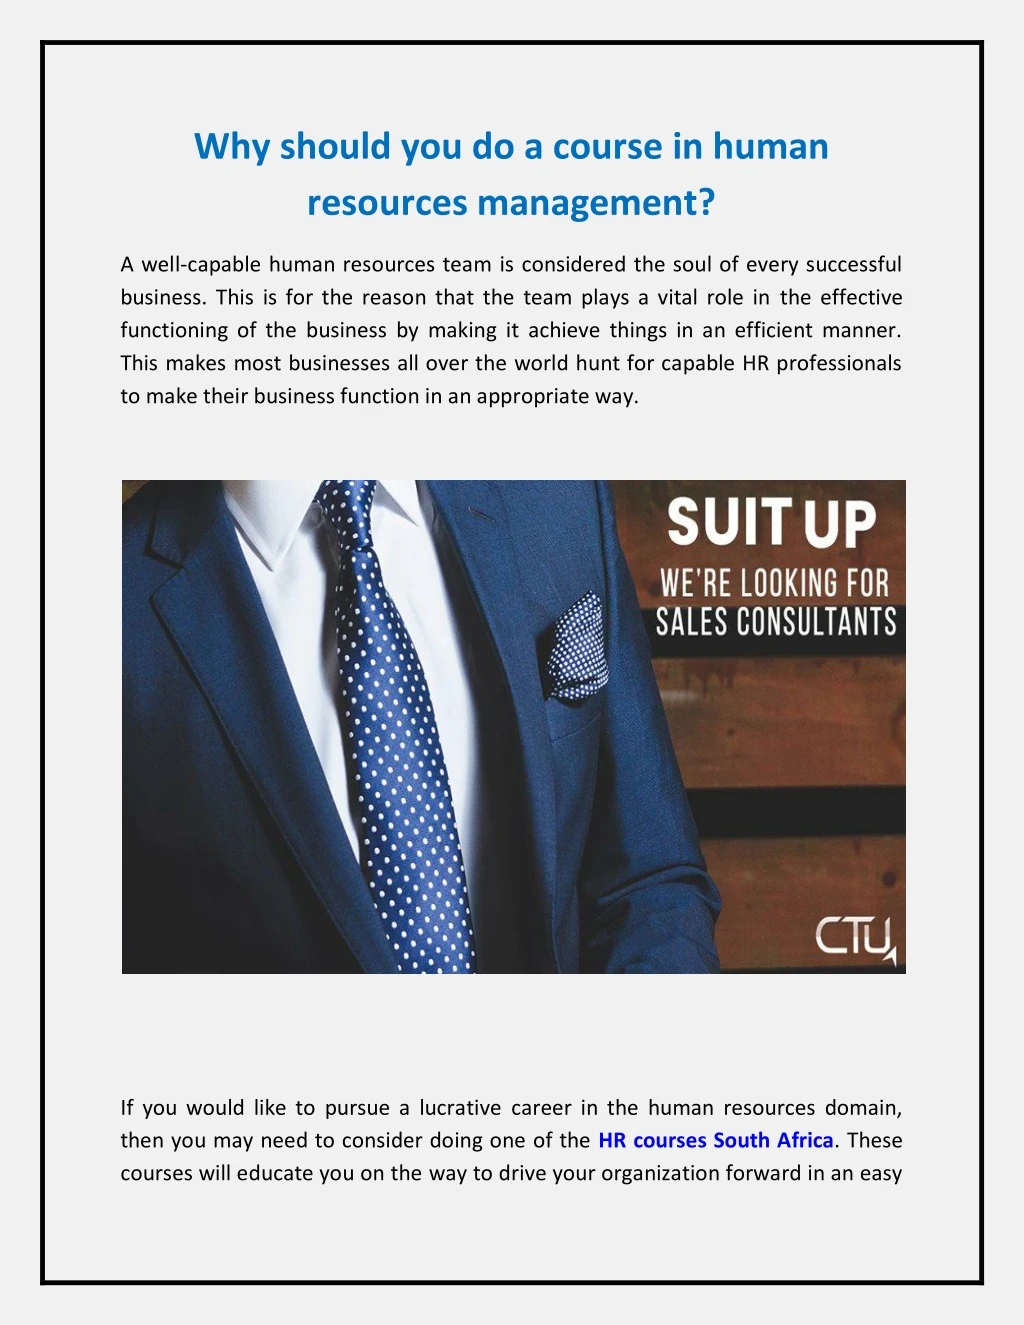 why should you do a course in human resources